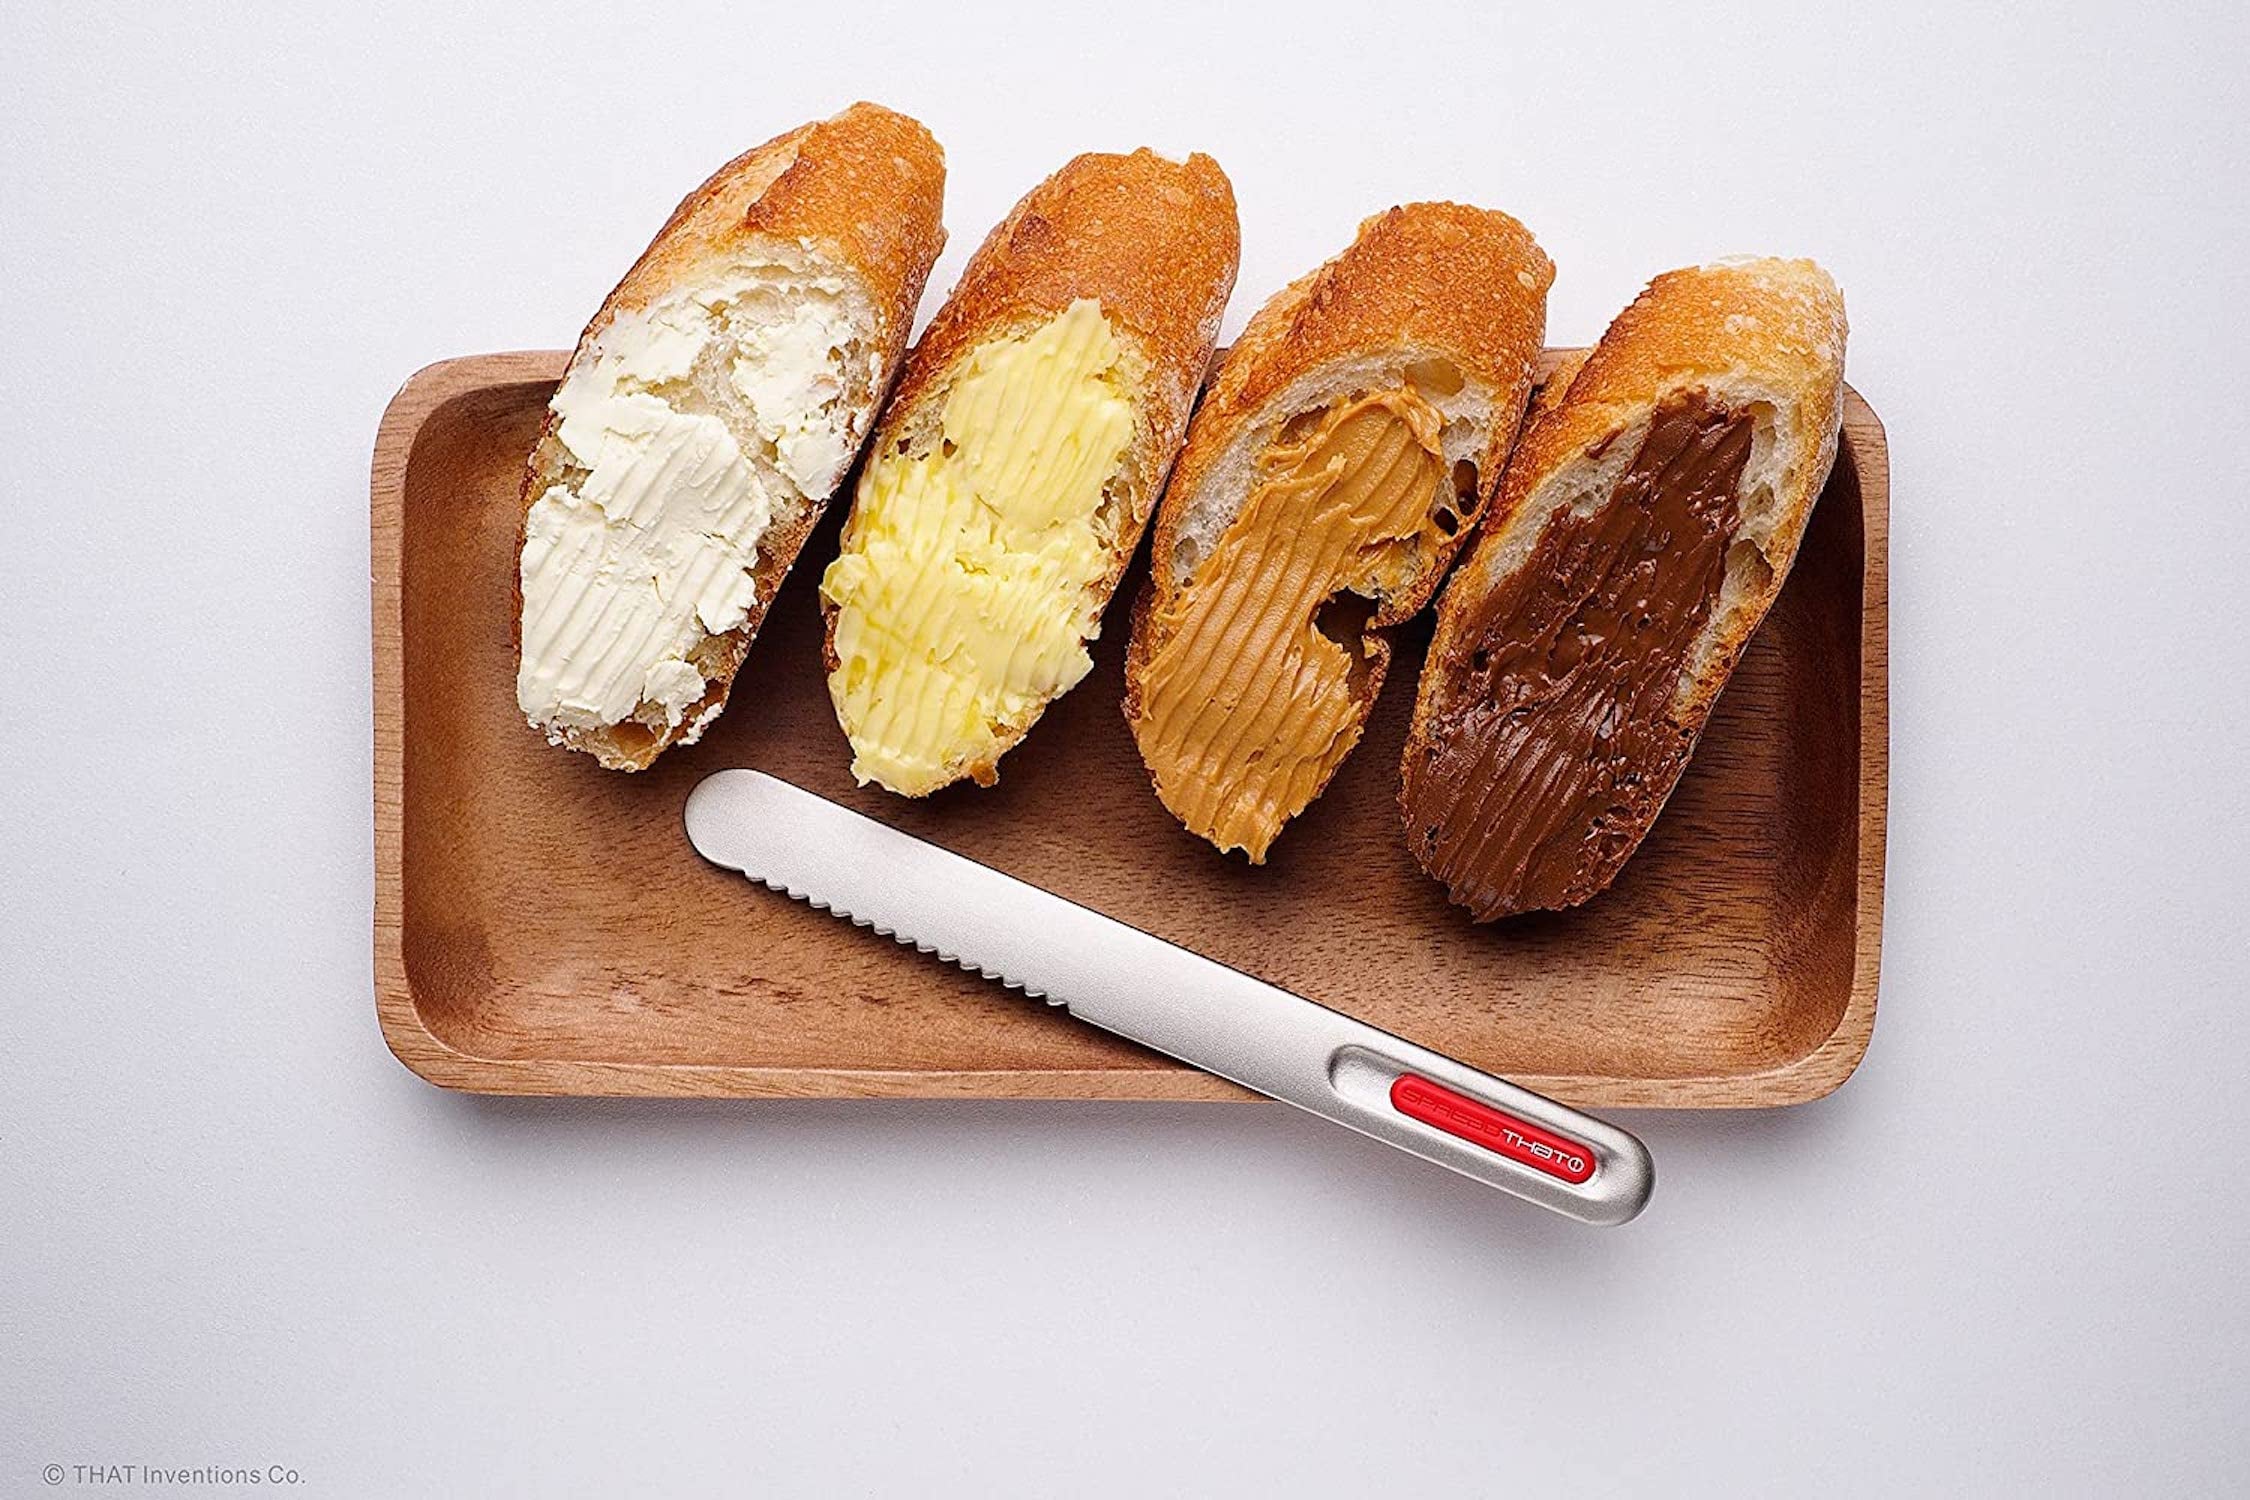 We Found a $14 Butter-Spreading Tool That Finally Makes It Easy to